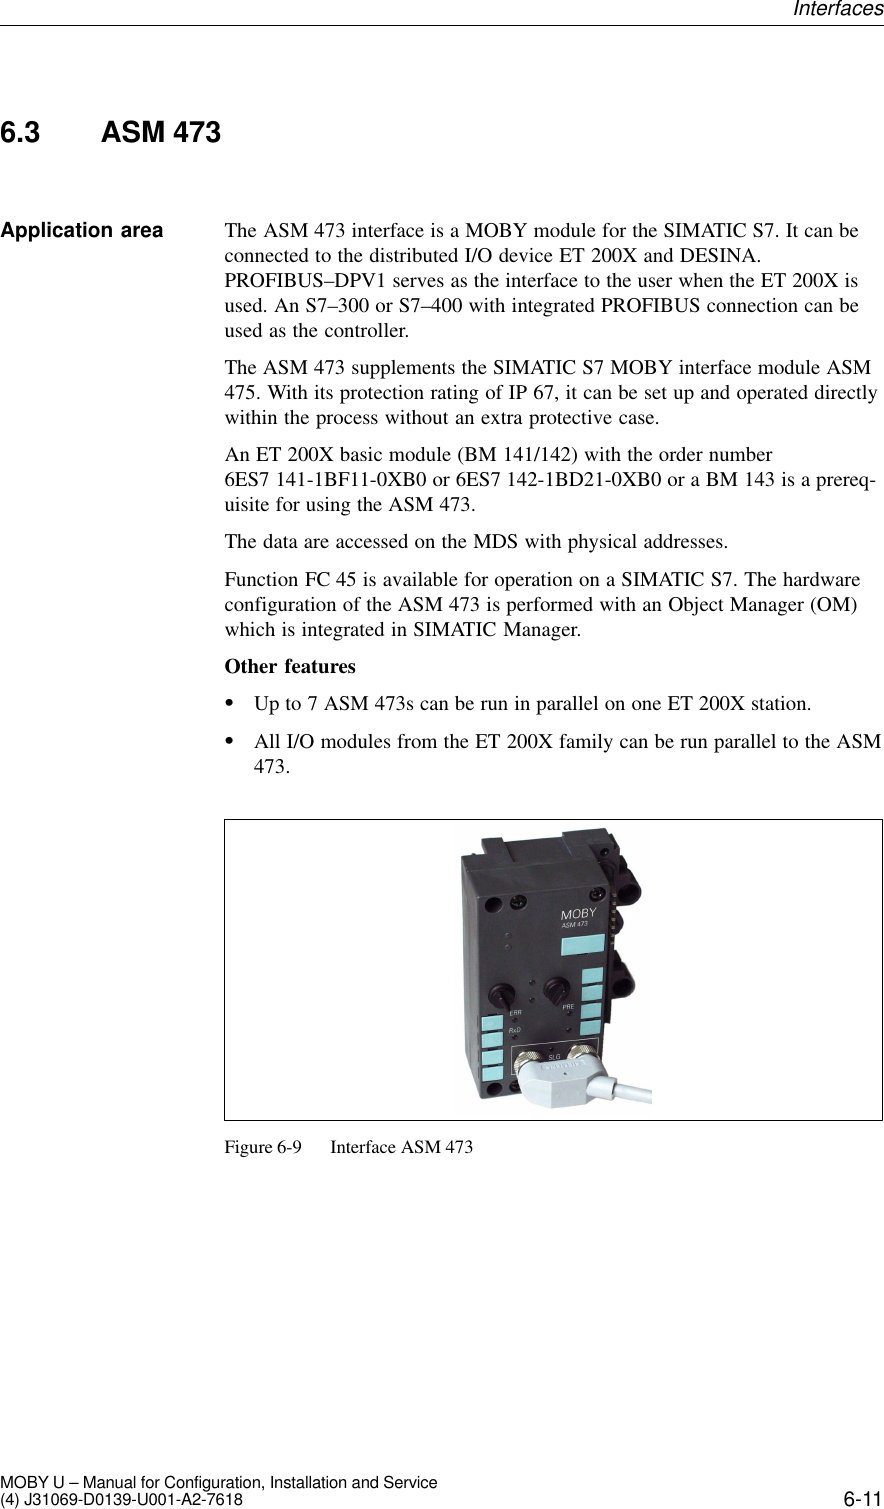 6-11MOBY U – Manual for Configuration, Installation and Service(4) J31069-D0139-U001-A2-76186.3 ASM 473The ASM 473 interface is a MOBY module for the SIMATIC S7. It can beconnected to the distributed I/O device ET 200X and DESINA.PROFIBUS–DPV1 serves as the interface to the user when the ET 200X isused. An S7–300 or S7–400 with integrated PROFIBUS connection can beused as the controller.The ASM 473 supplements the SIMATIC S7 MOBY interface module ASM475. With its protection rating of IP 67, it can be set up and operated directlywithin the process without an extra protective case.An ET 200X basic module (BM 141/142) with the order number6ES7 141-1BF11-0XB0 or 6ES7 142-1BD21-0XB0 or a BM 143 is a prereq-uisite for using the ASM 473.The data are accessed on the MDS with physical addresses.Function FC 45 is available for operation on a SIMATIC S7. The hardwareconfiguration of the ASM 473 is performed with an Object Manager (OM)which is integrated in SIMATIC Manager.Other featuresUp to 7 ASM 473s can be run in parallel on one ET 200X station.All I/O modules from the ET 200X family can be run parallel to the ASM473.Figure 6-9 Interface ASM 473Application areaInterfaces